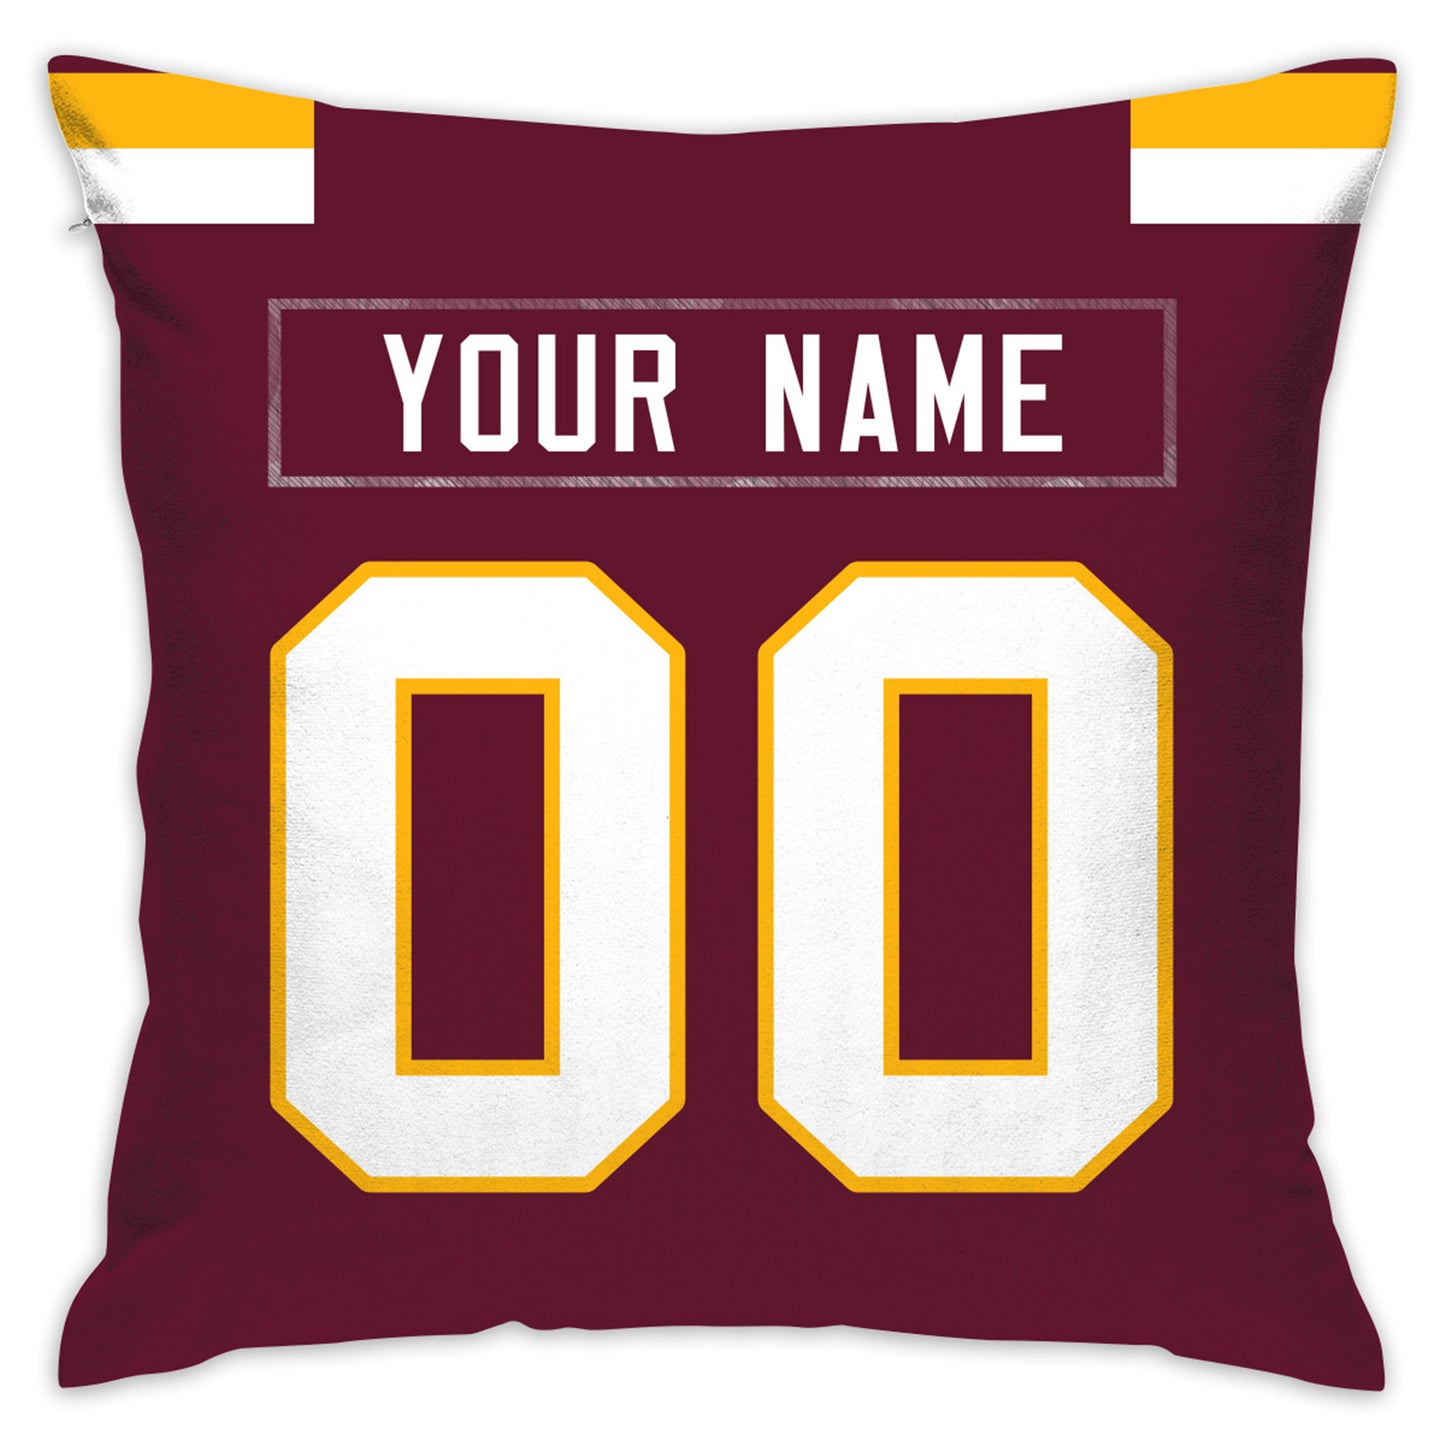 Custom Washington Football Team Decorative Throw Pillow Cover 18" x 18"- Print Personalized Style Customizable Design Team Any Name & Number